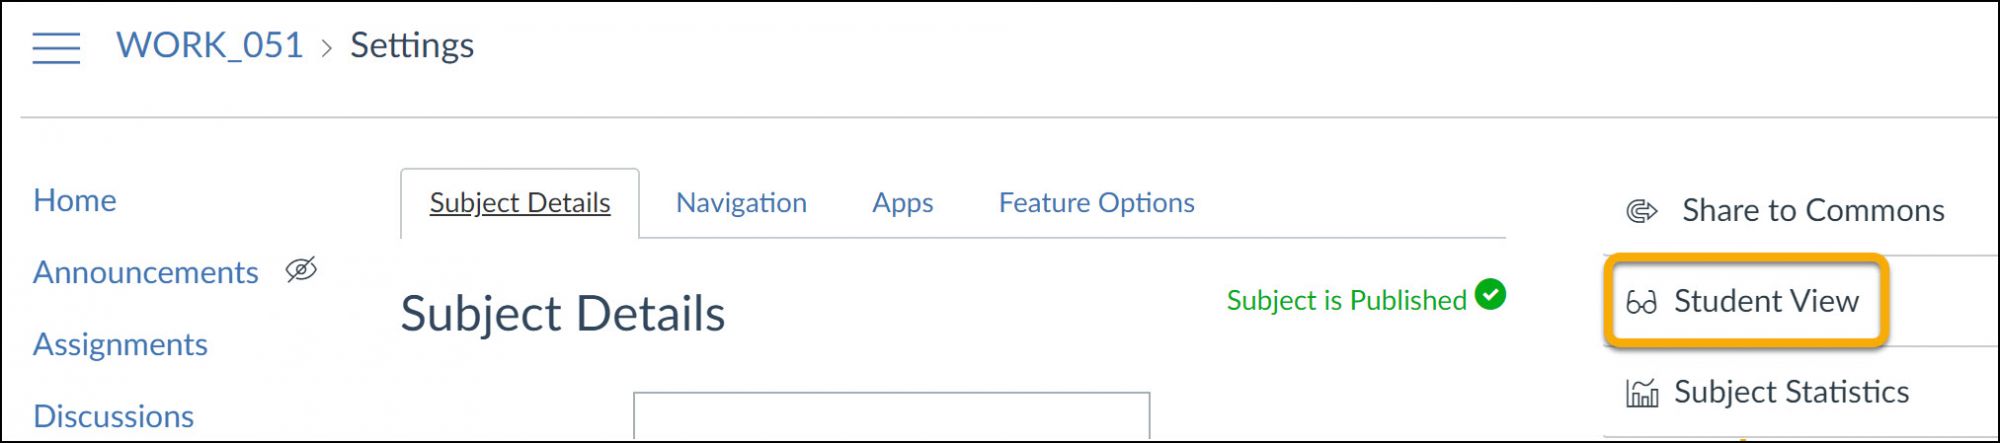 Accessing Student View from Settings